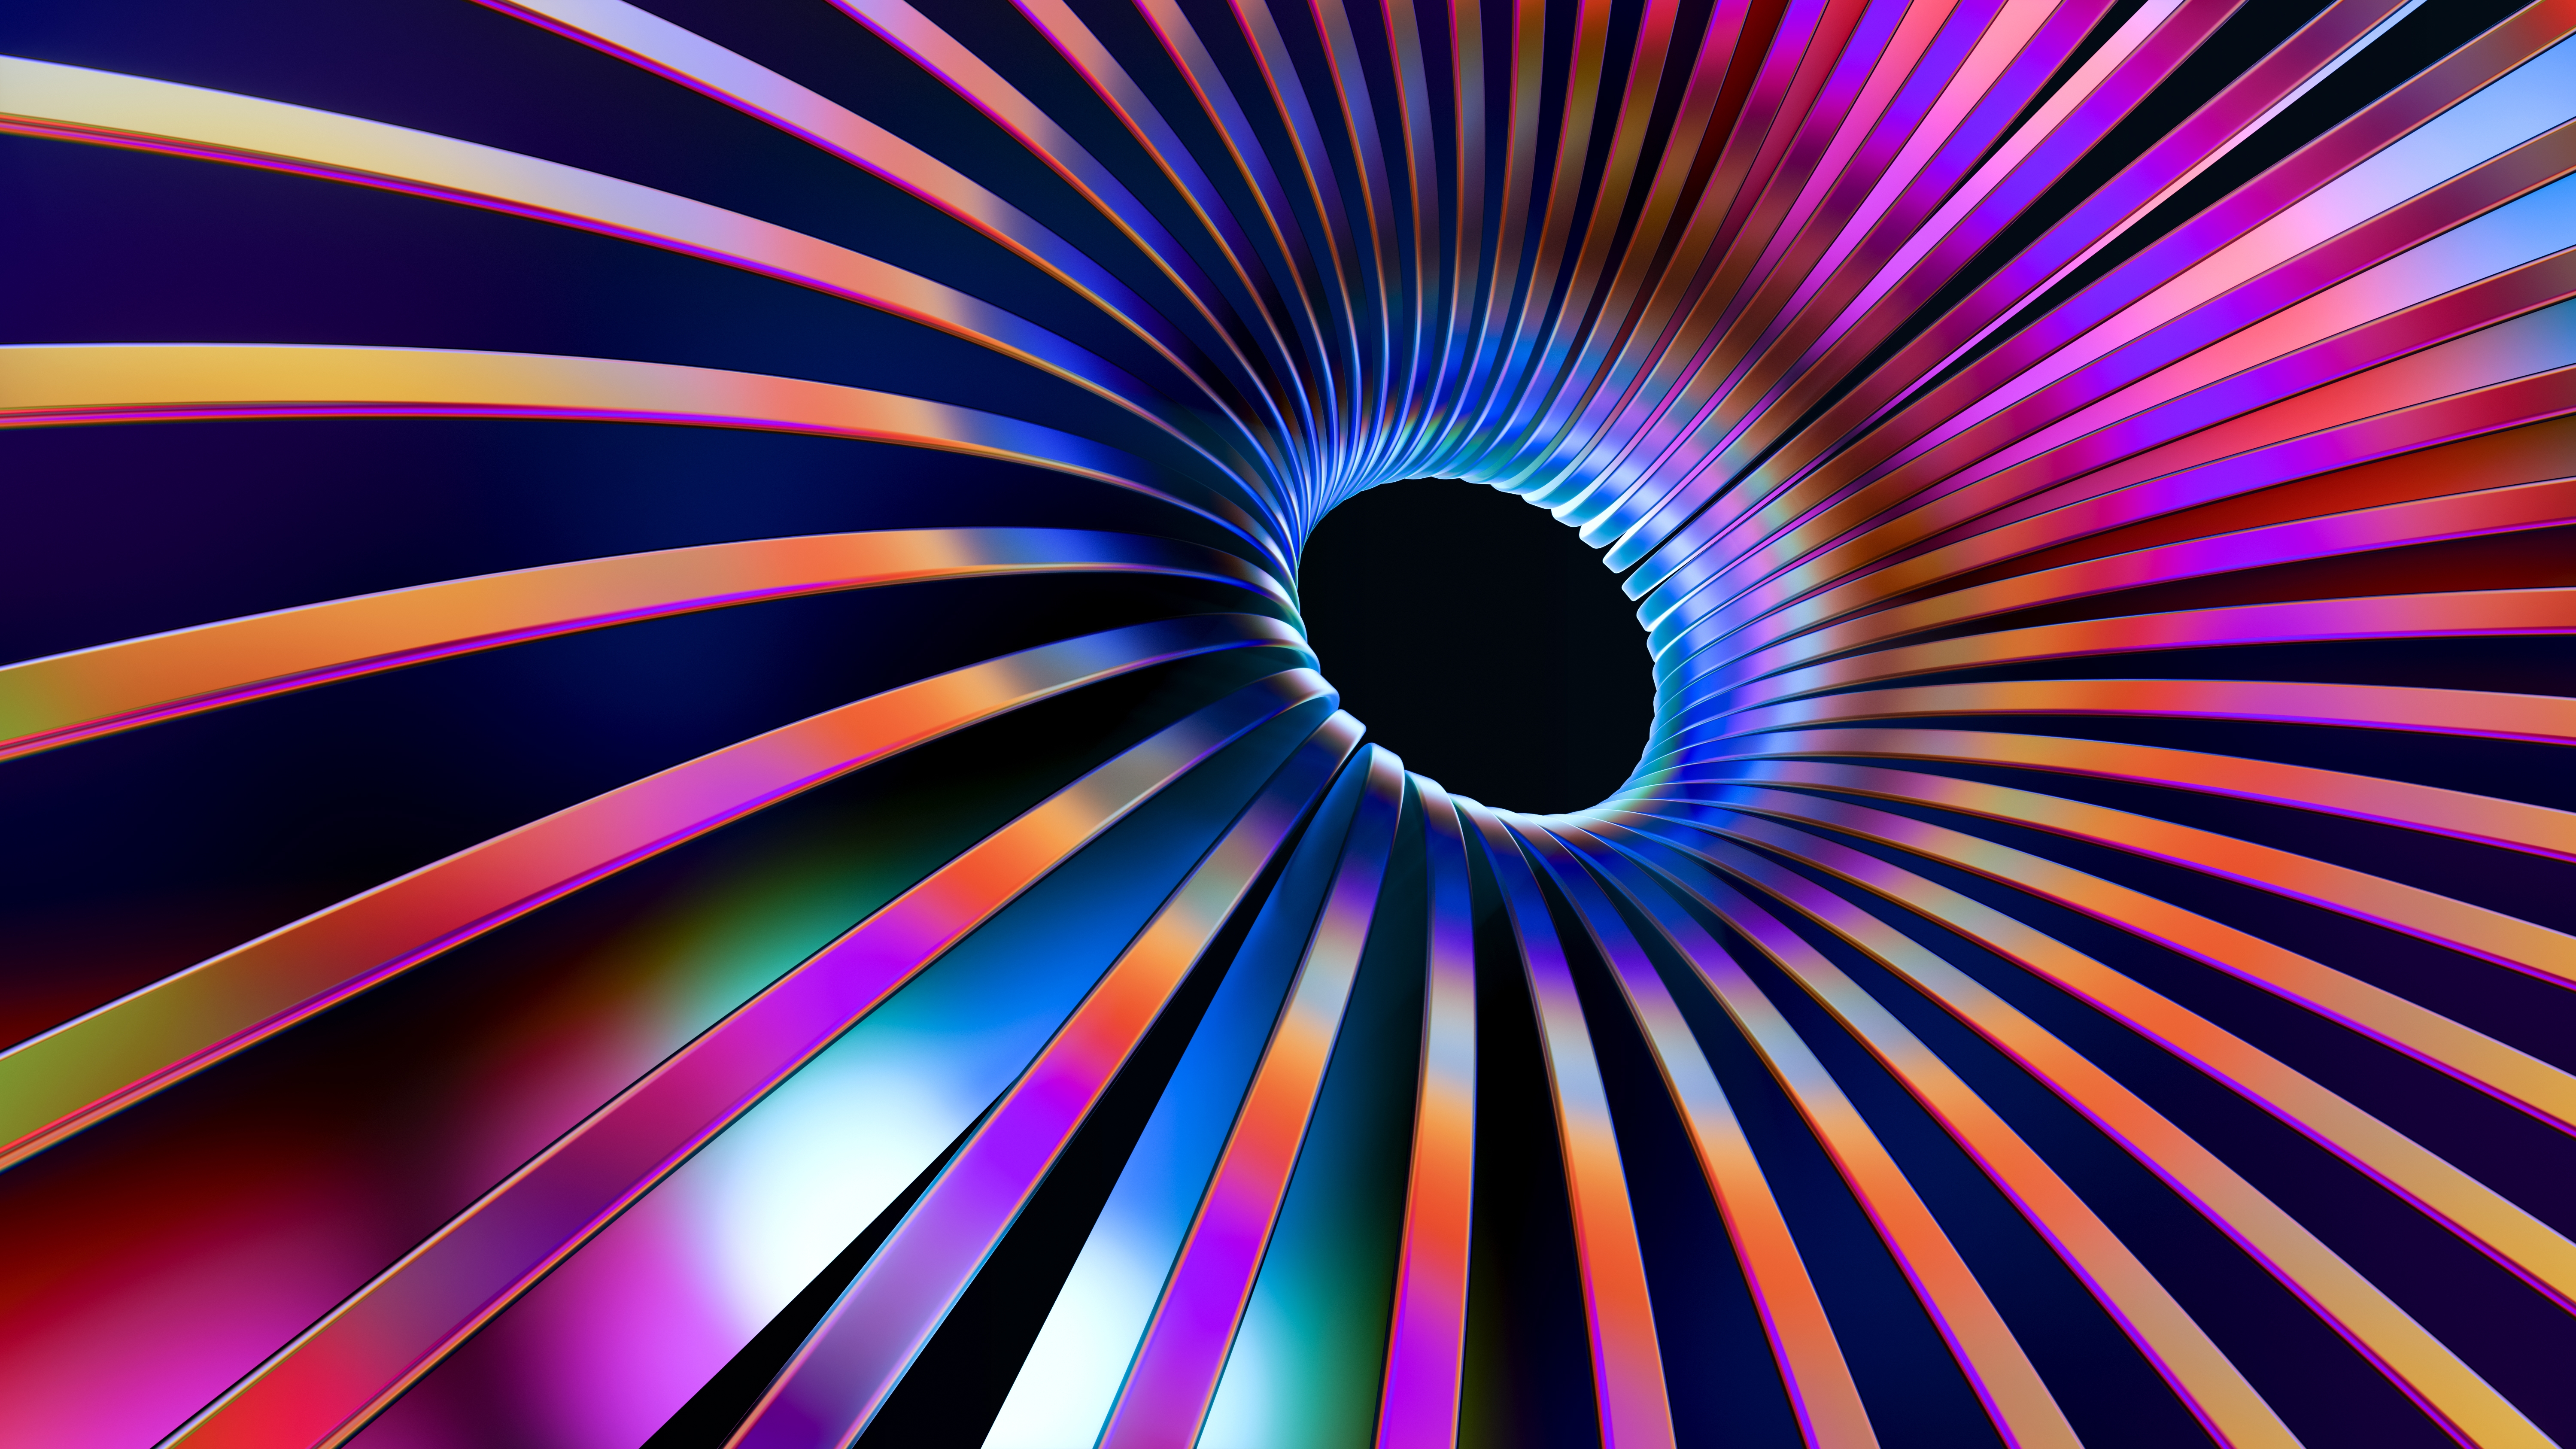 HD wallpaper, Psychedelic Art, Colorful, 5K, Swirling Vortex, Illusion